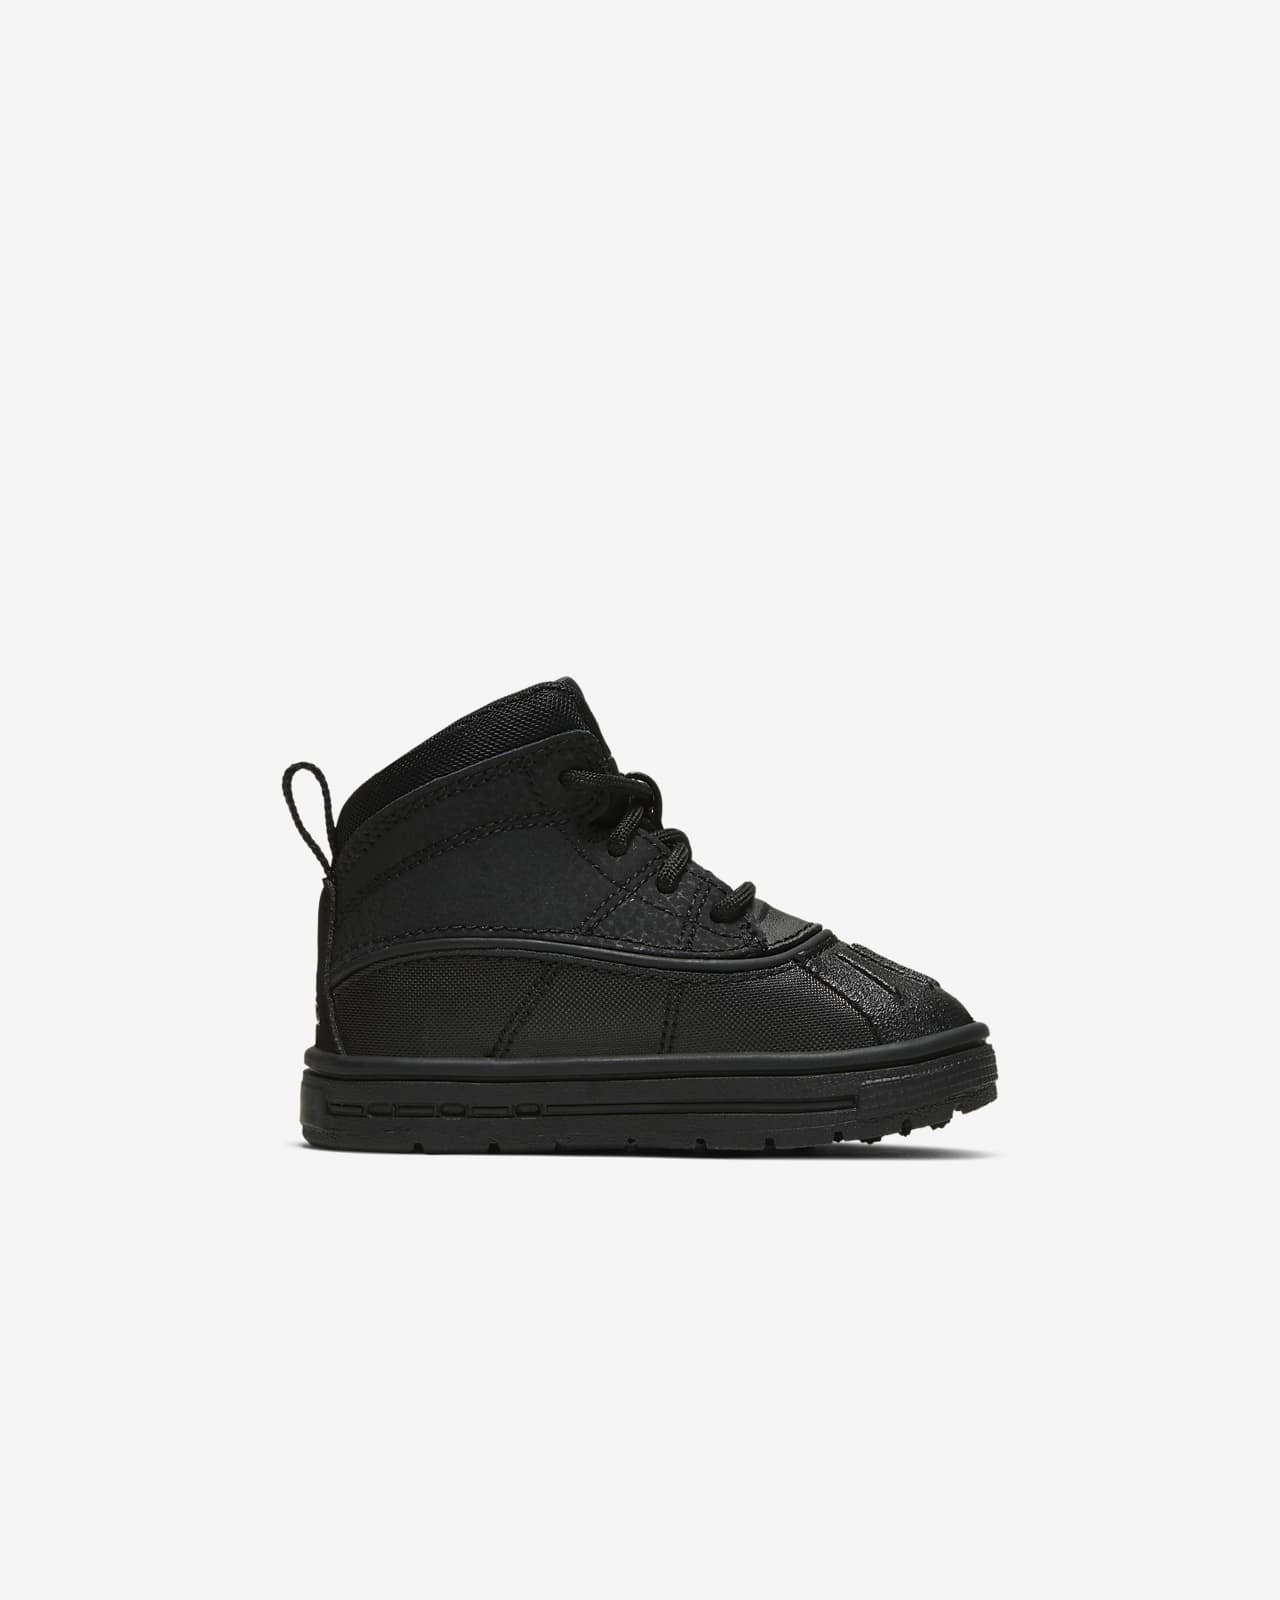 nike toddler woodside boots